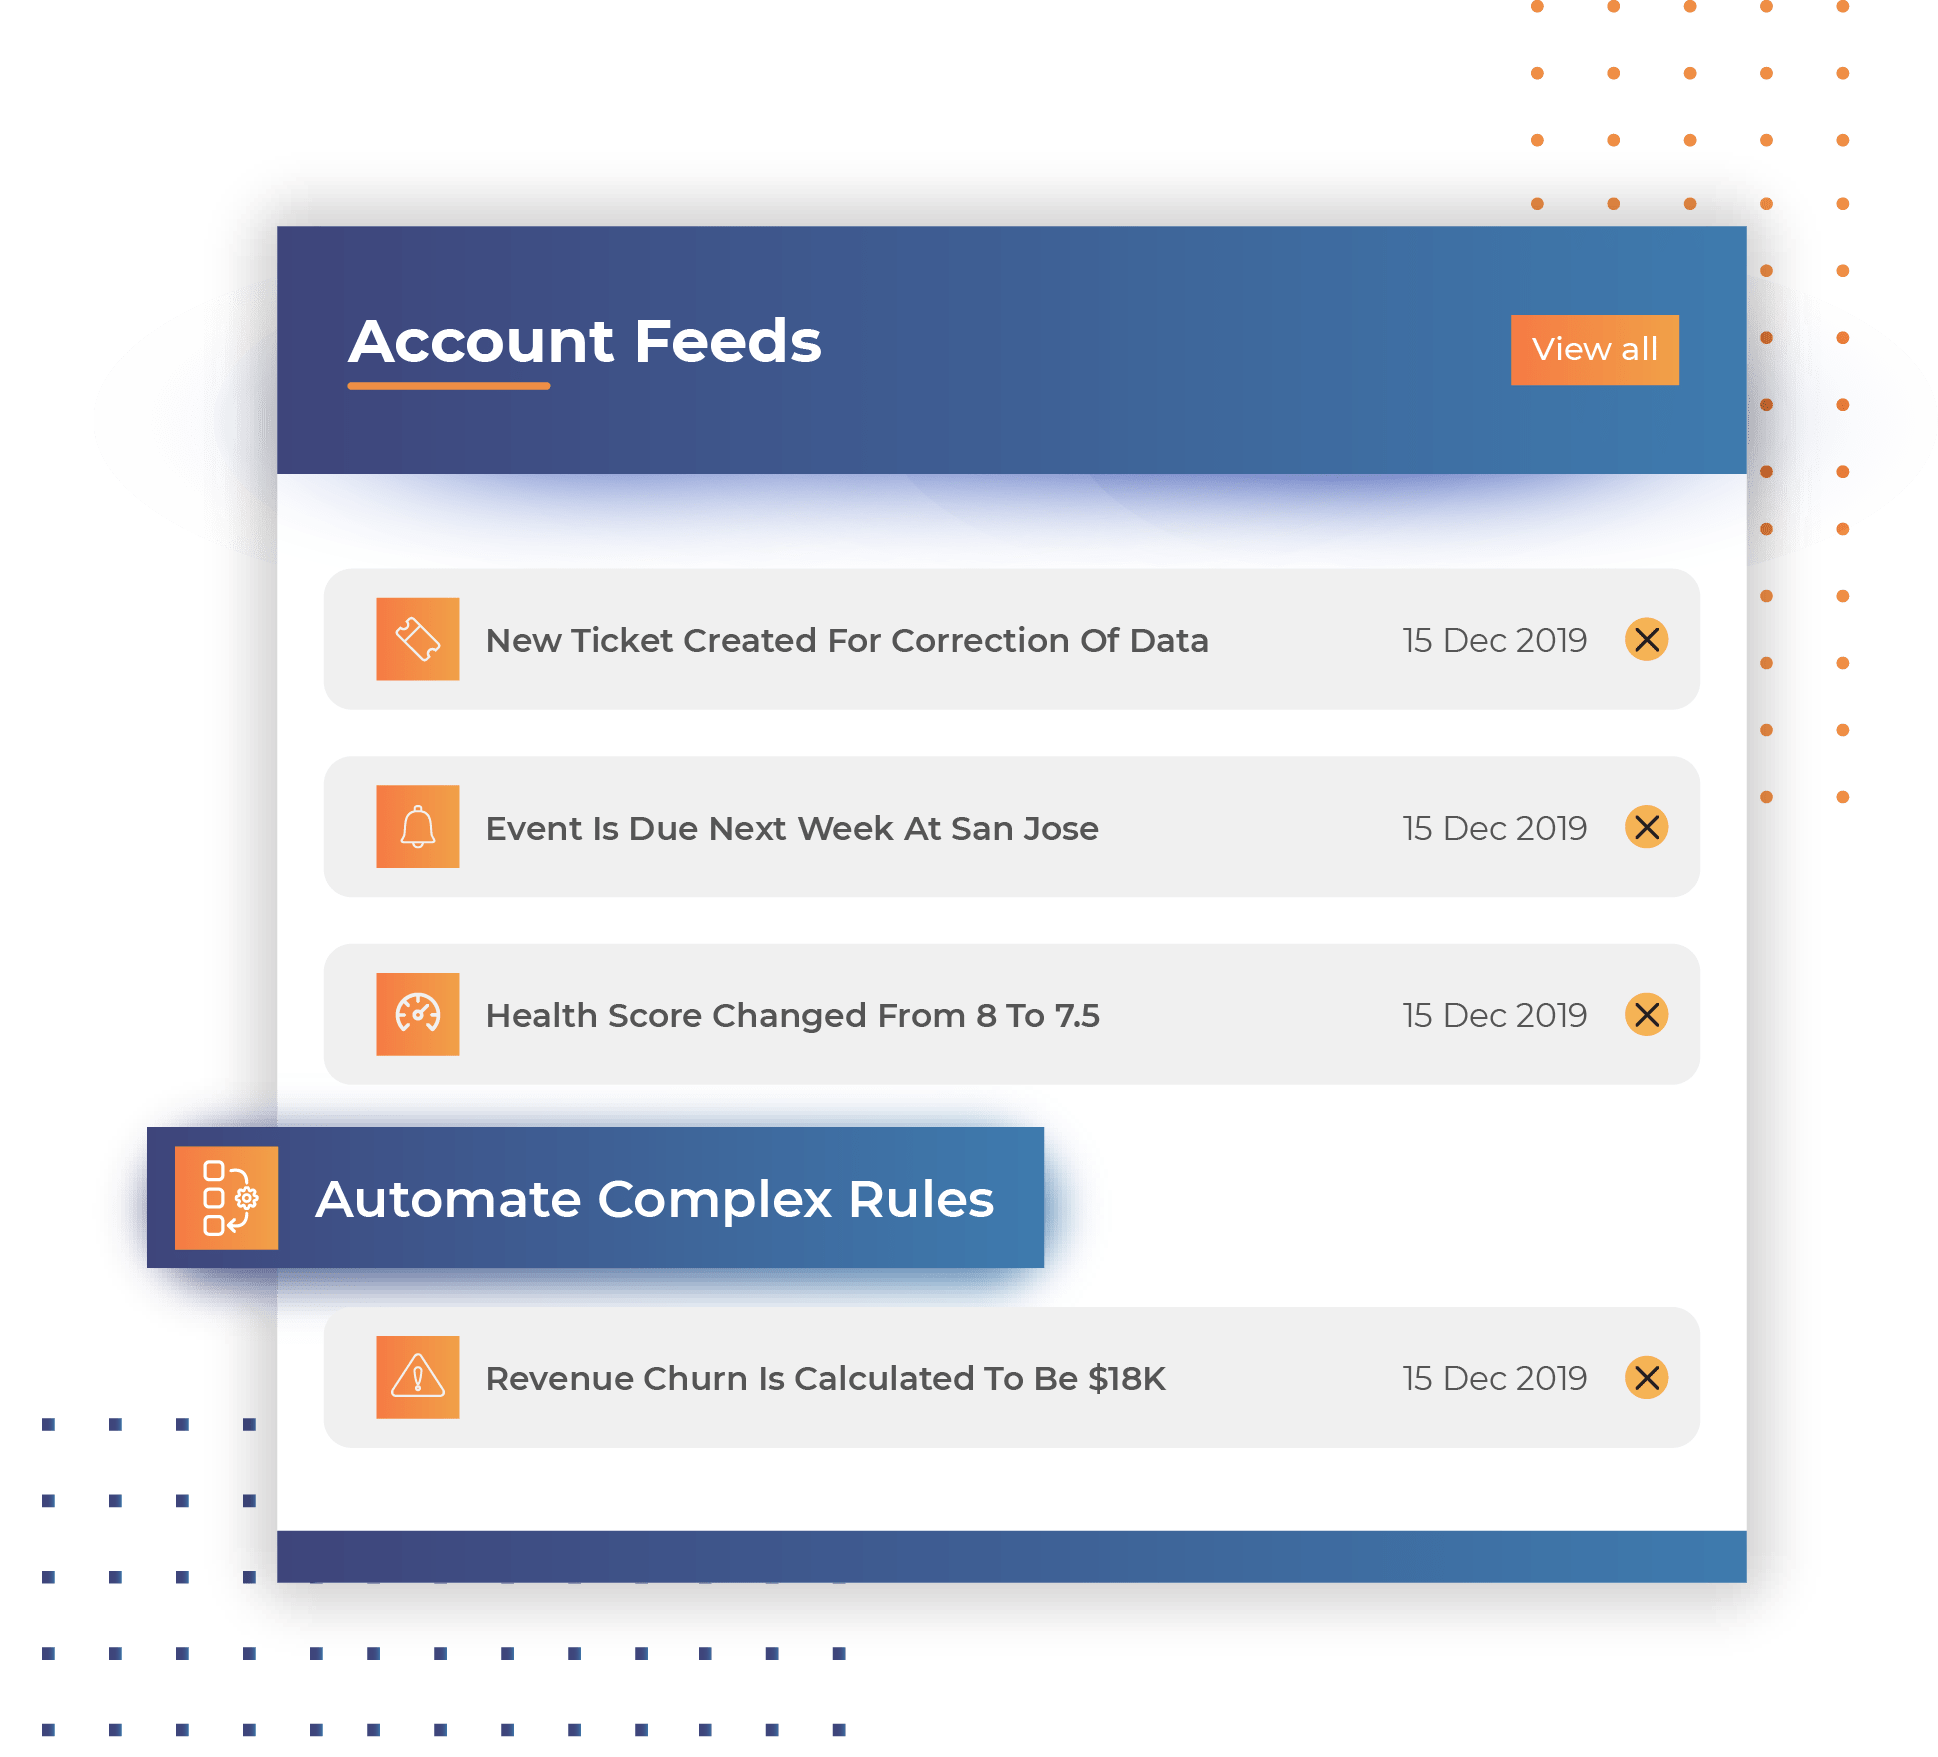 Automated account feed